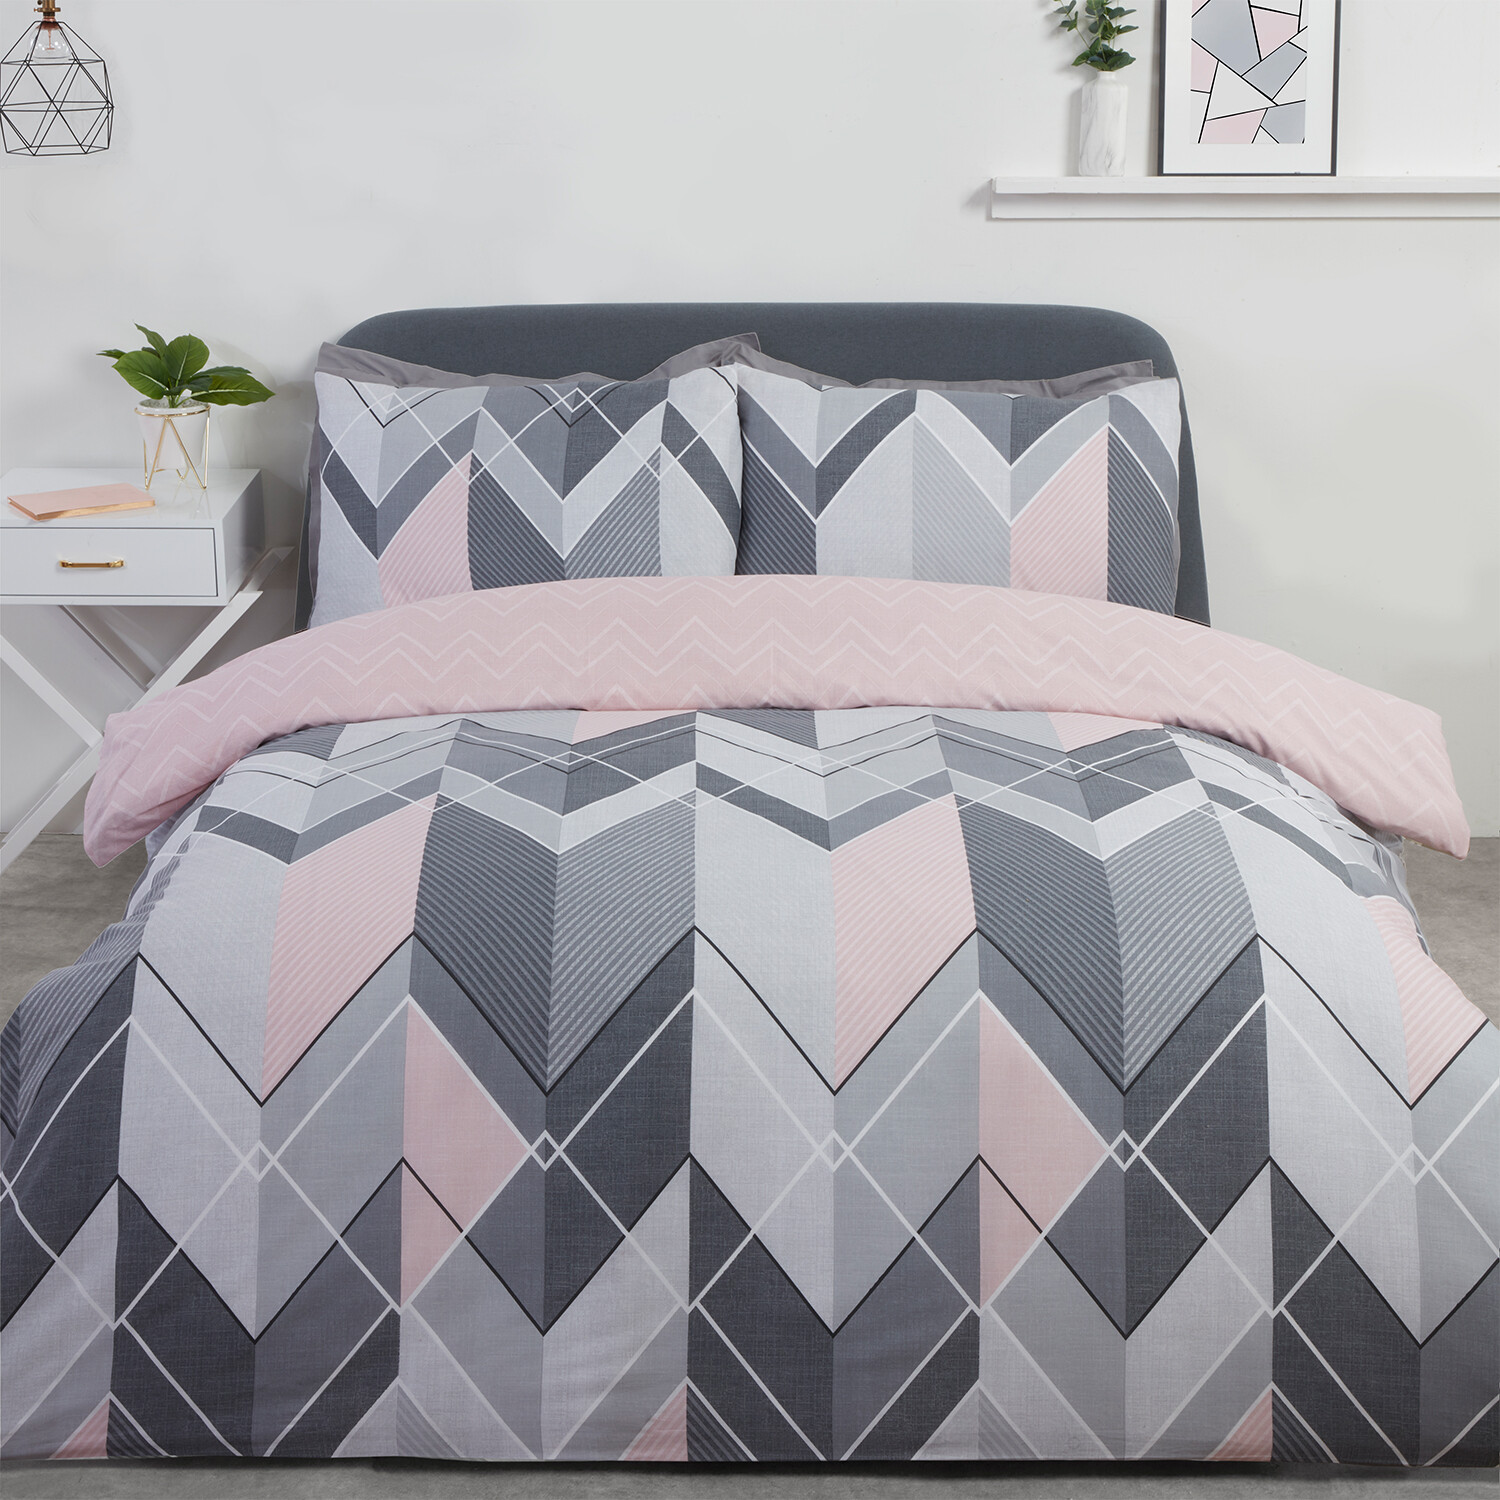 My Home King Pink Chevron Duvet Cover and Pillowcase Image 1